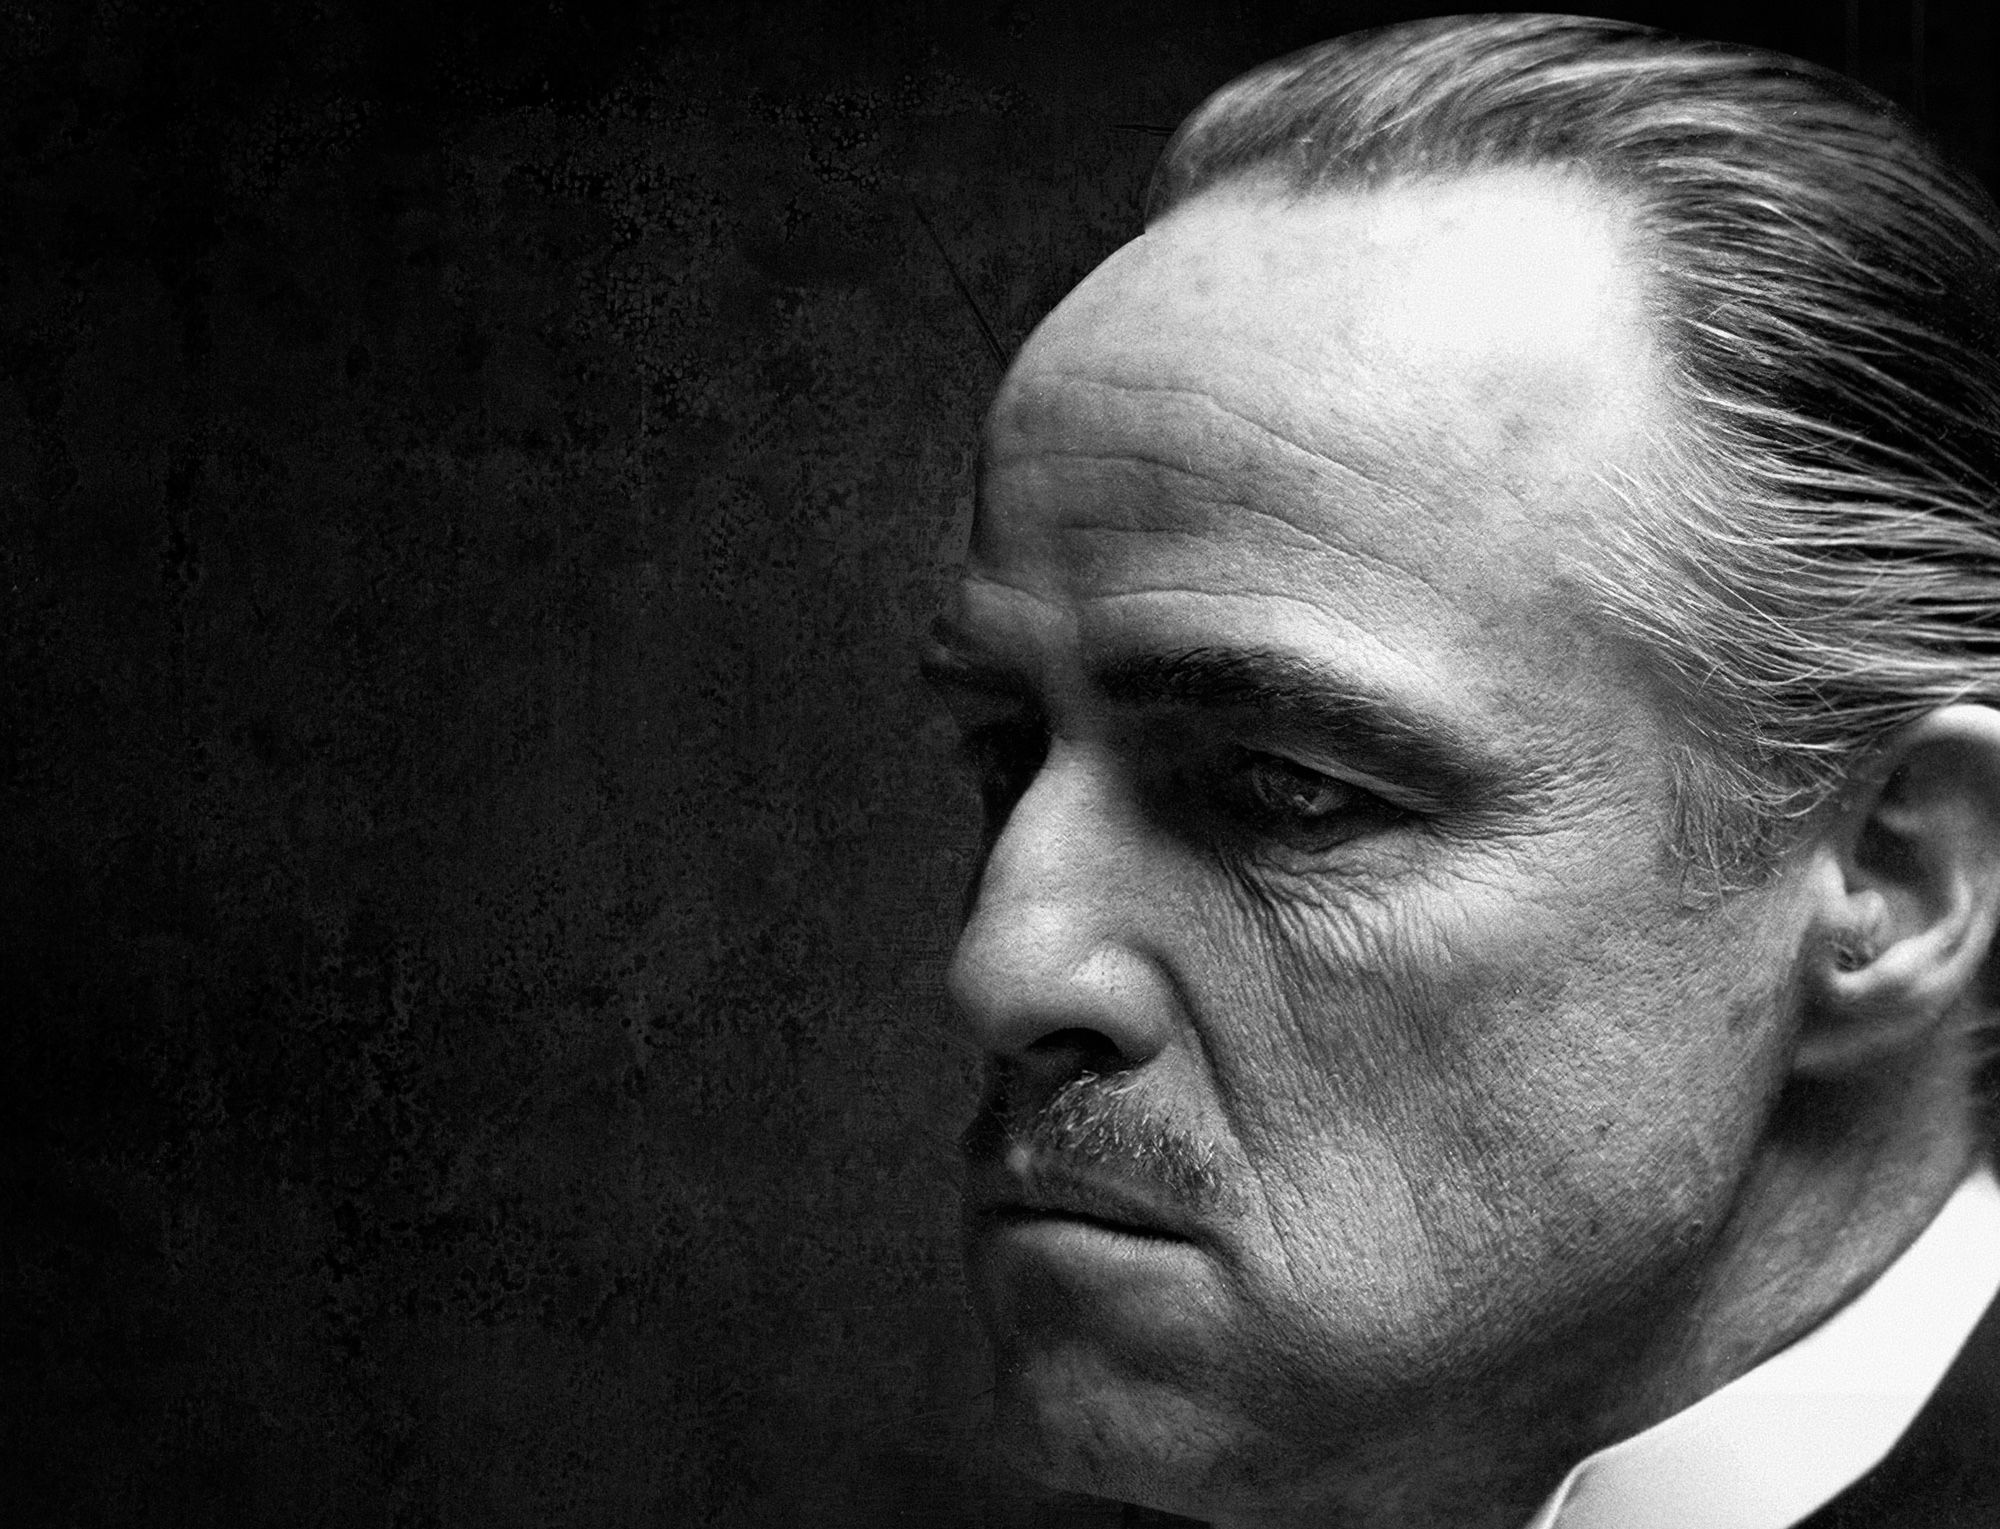 Godfather Quotes Wallpapers - Top Free Godfather Quotes Backgrounds ...